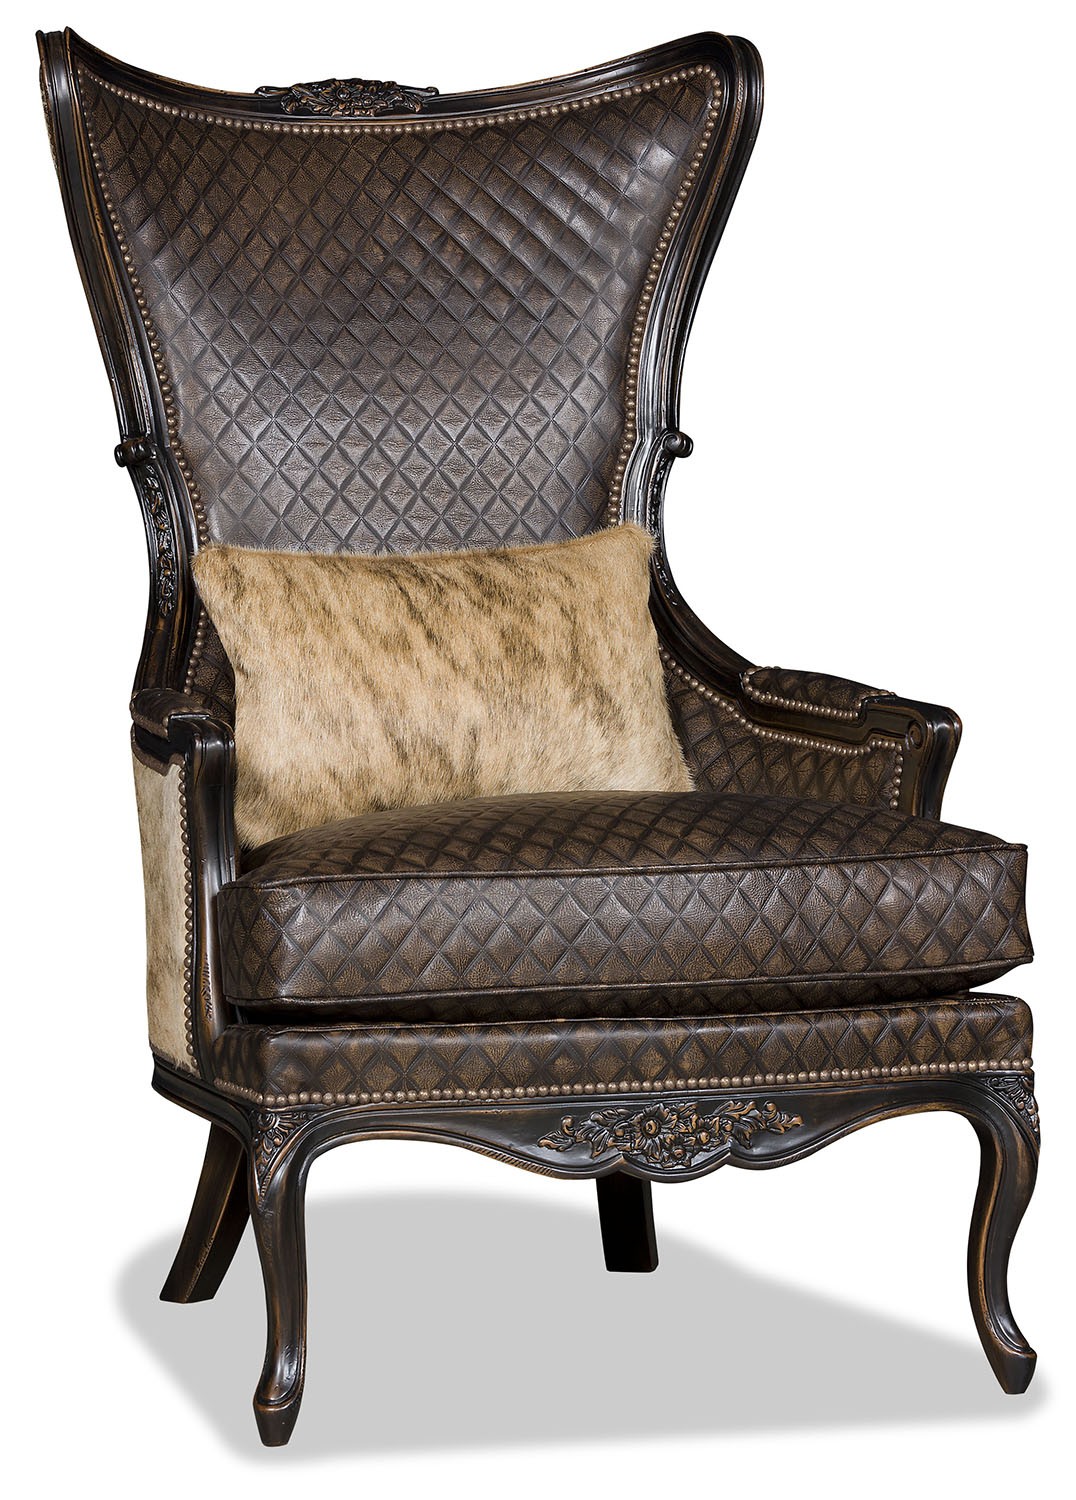 CHAIRS, Leather, Upholstered, Accent Fancy hair on hide chair